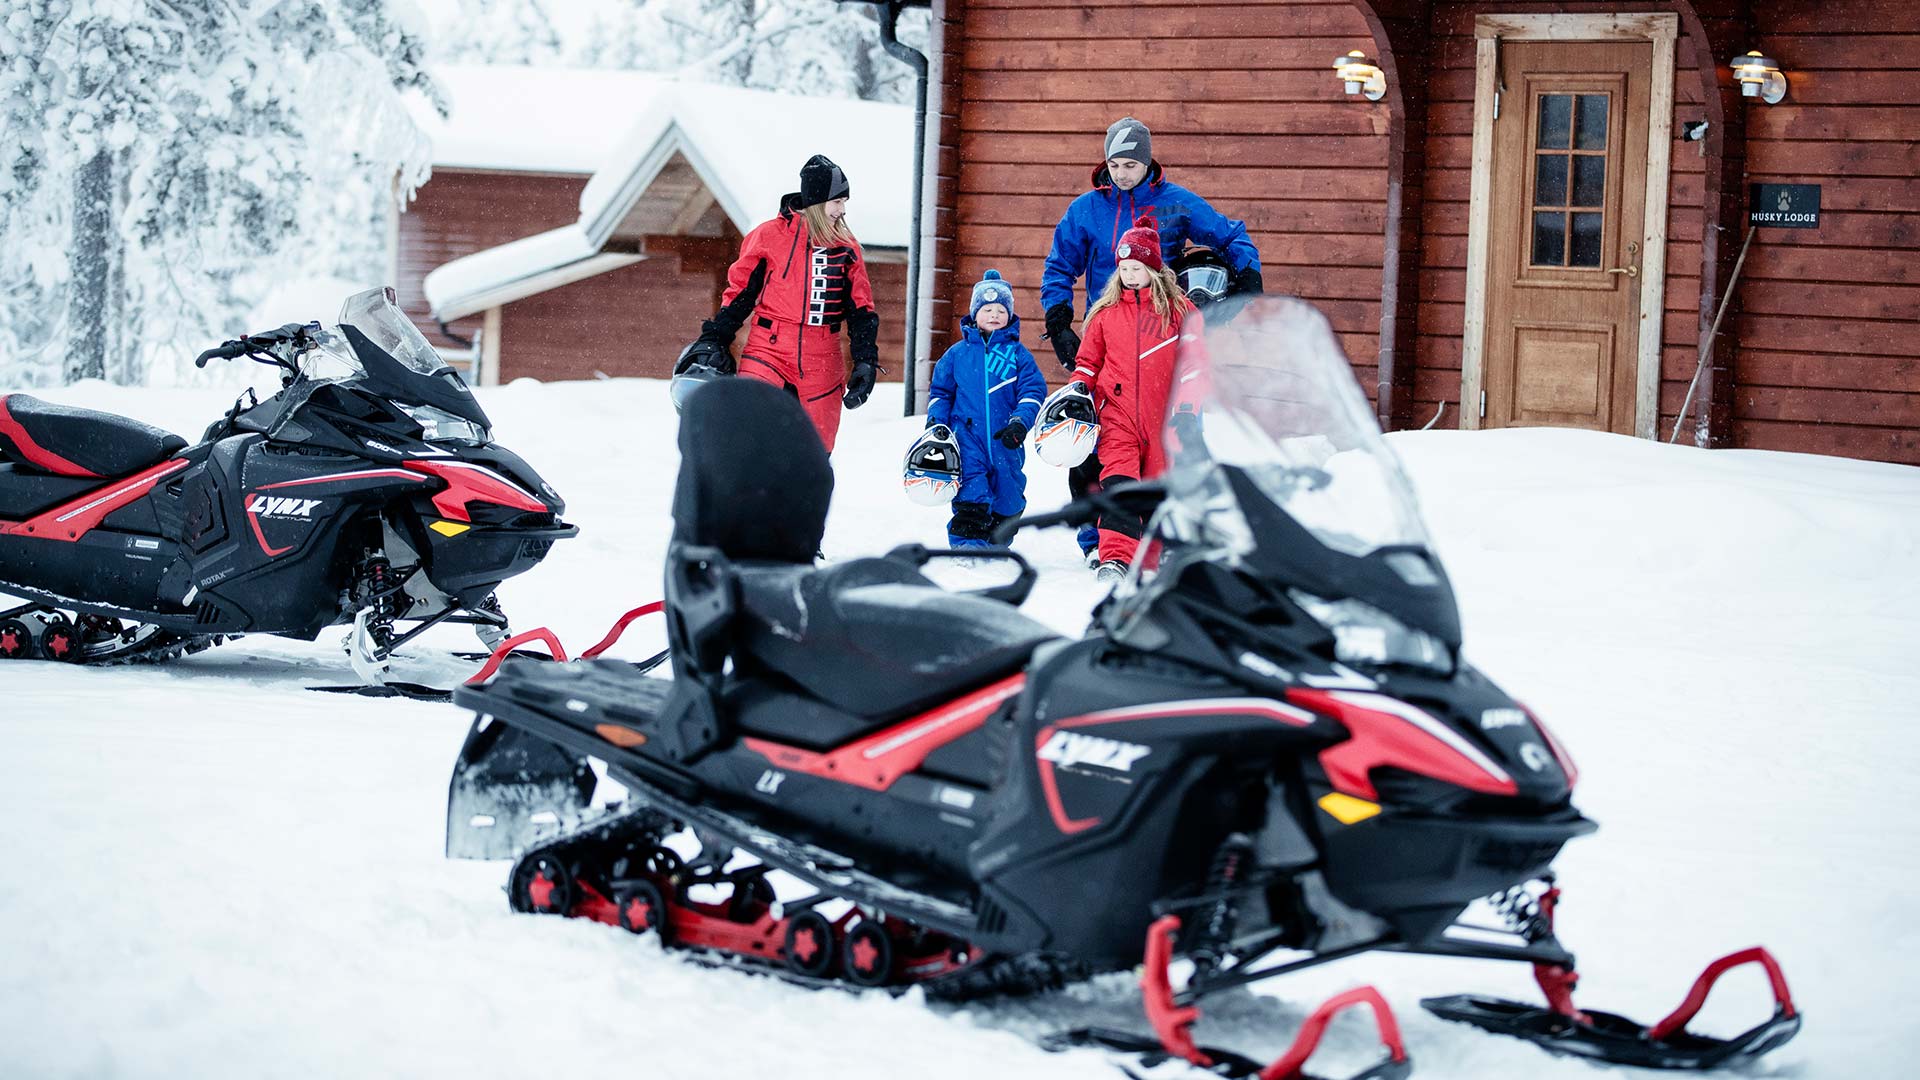 Family going riding with Lynx Adventure snowmobiles